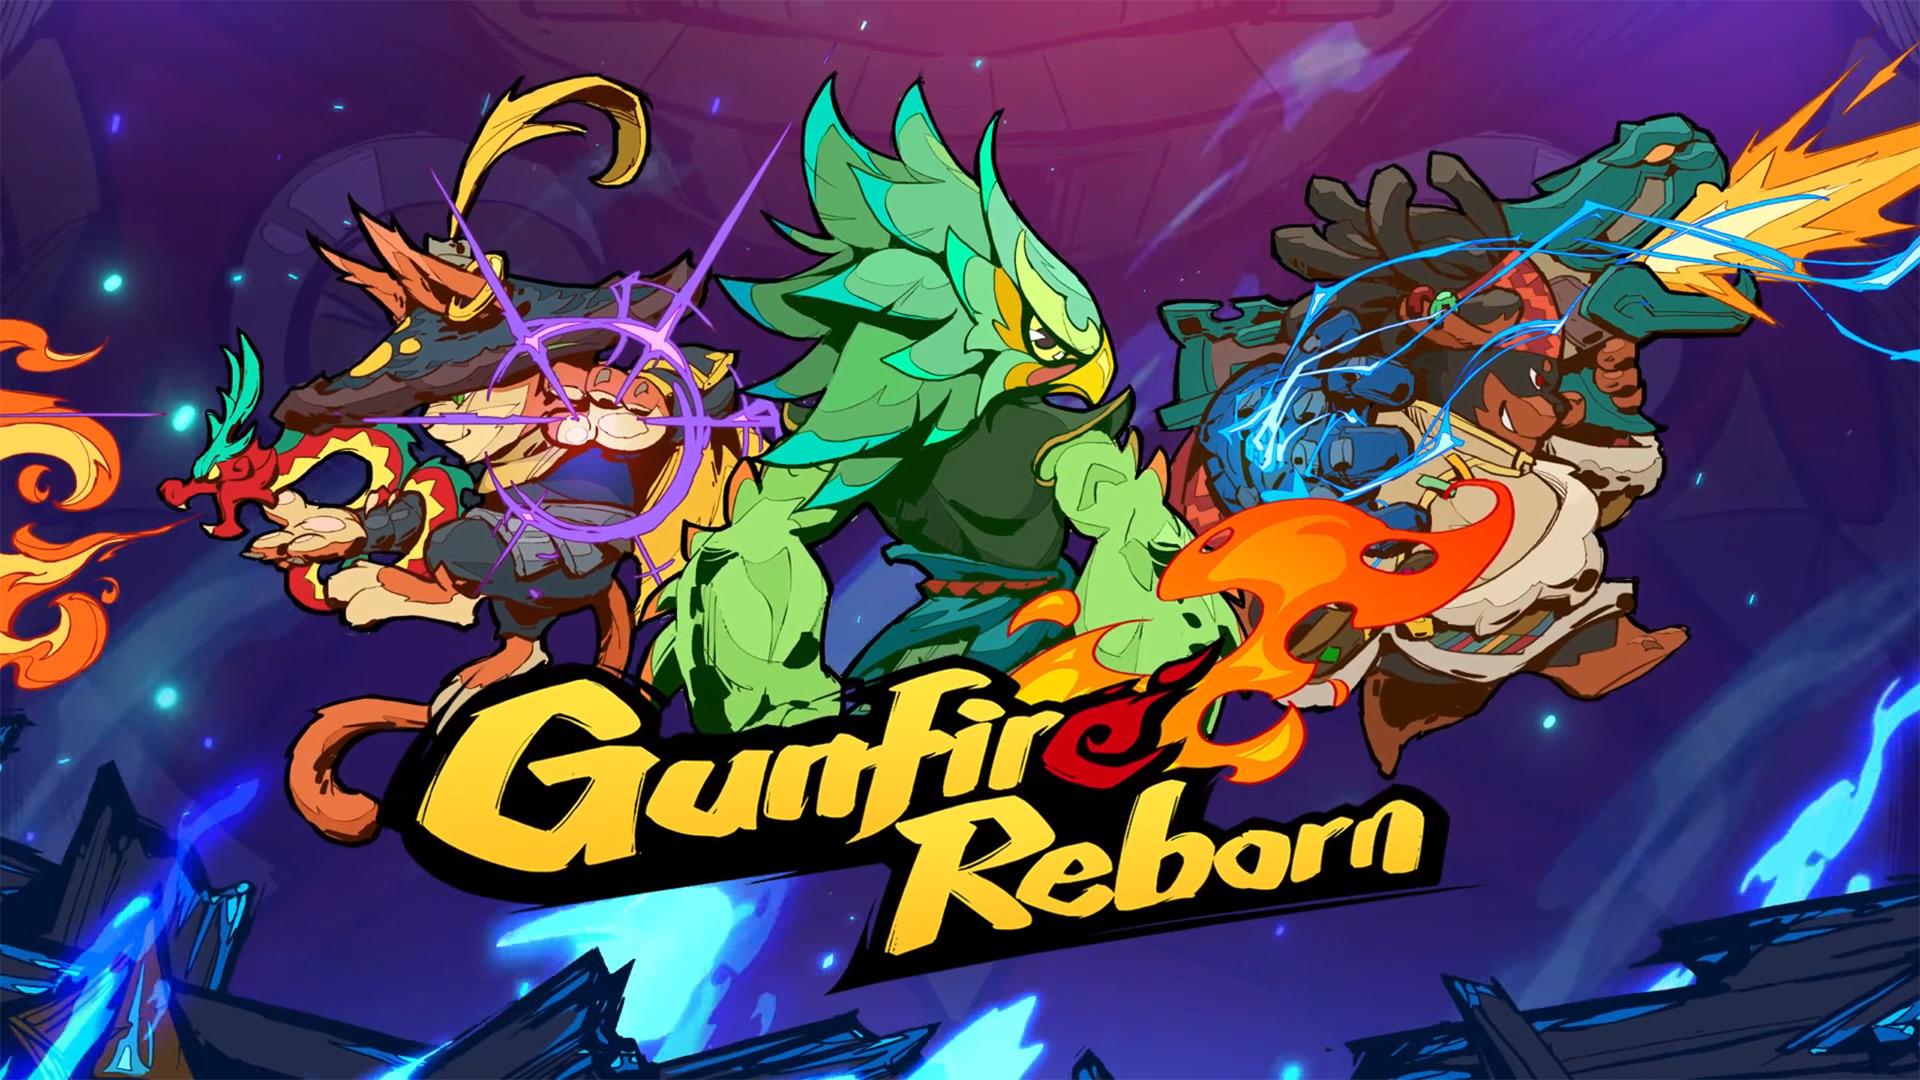 Gunfire Reborn is heading to PlayStation 4 and PlayStation 5 on June 1